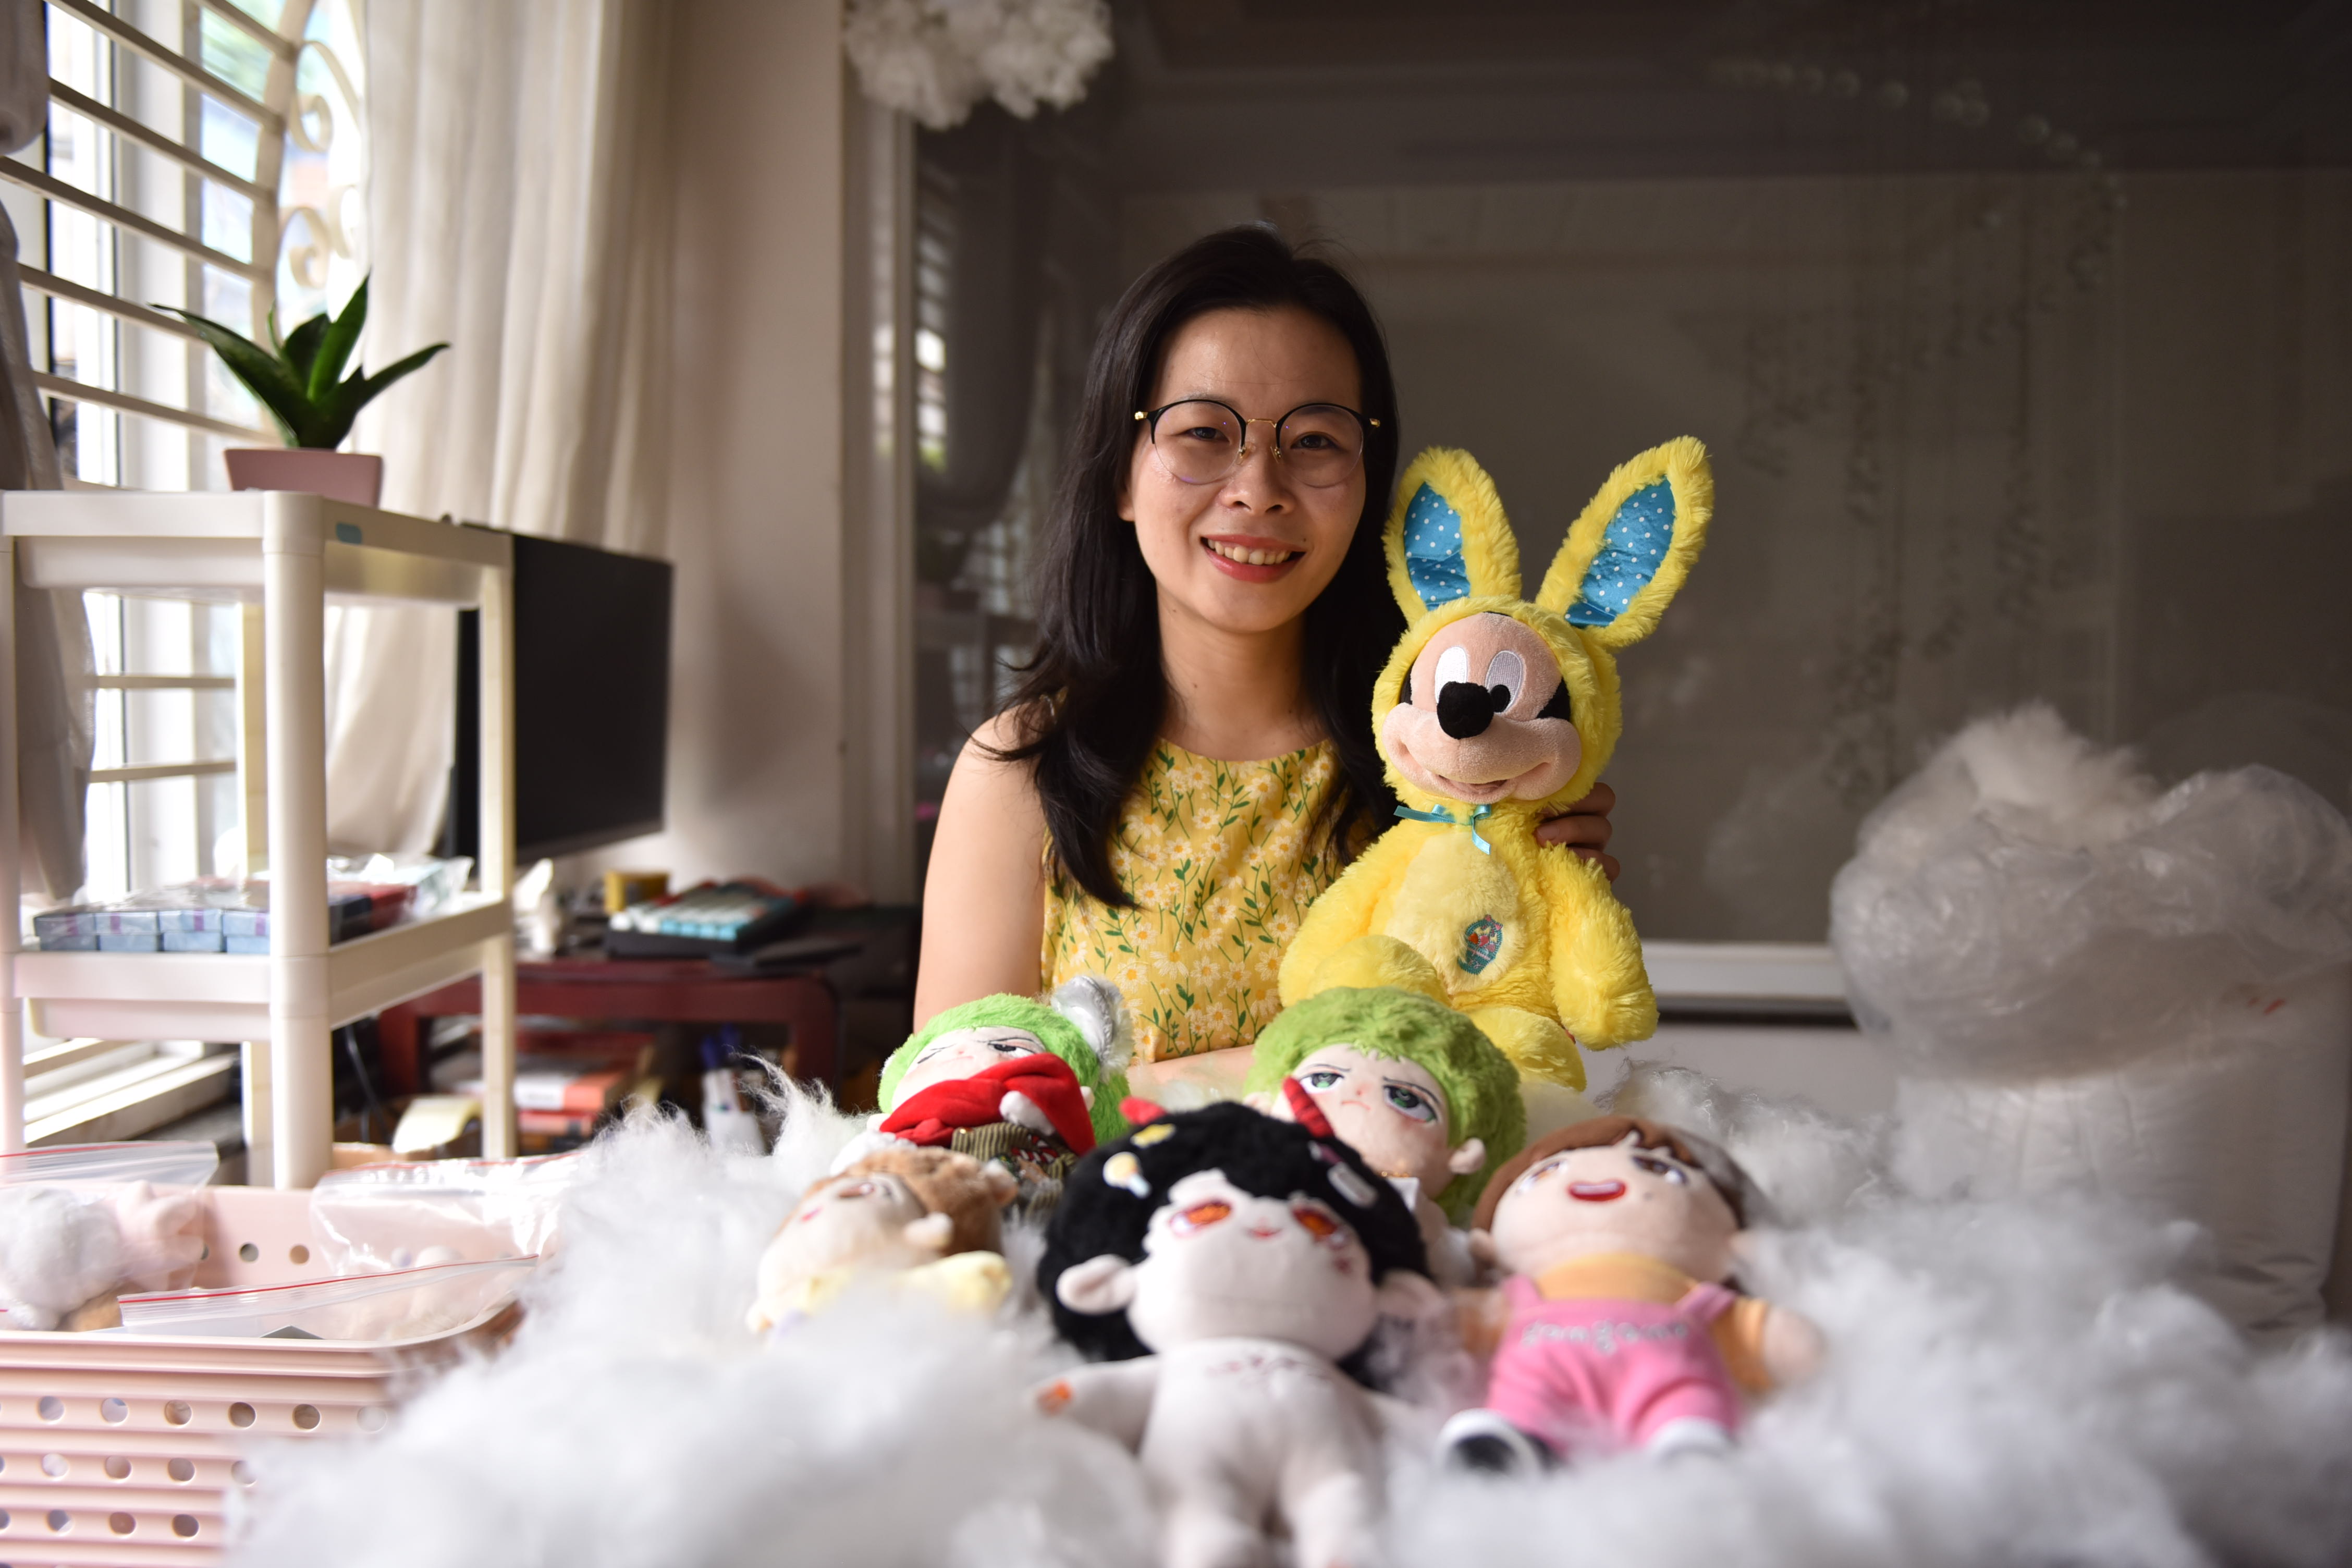 Ho Chi Minh City woman hopes to open ‘hospital’ for broken cuddly toys